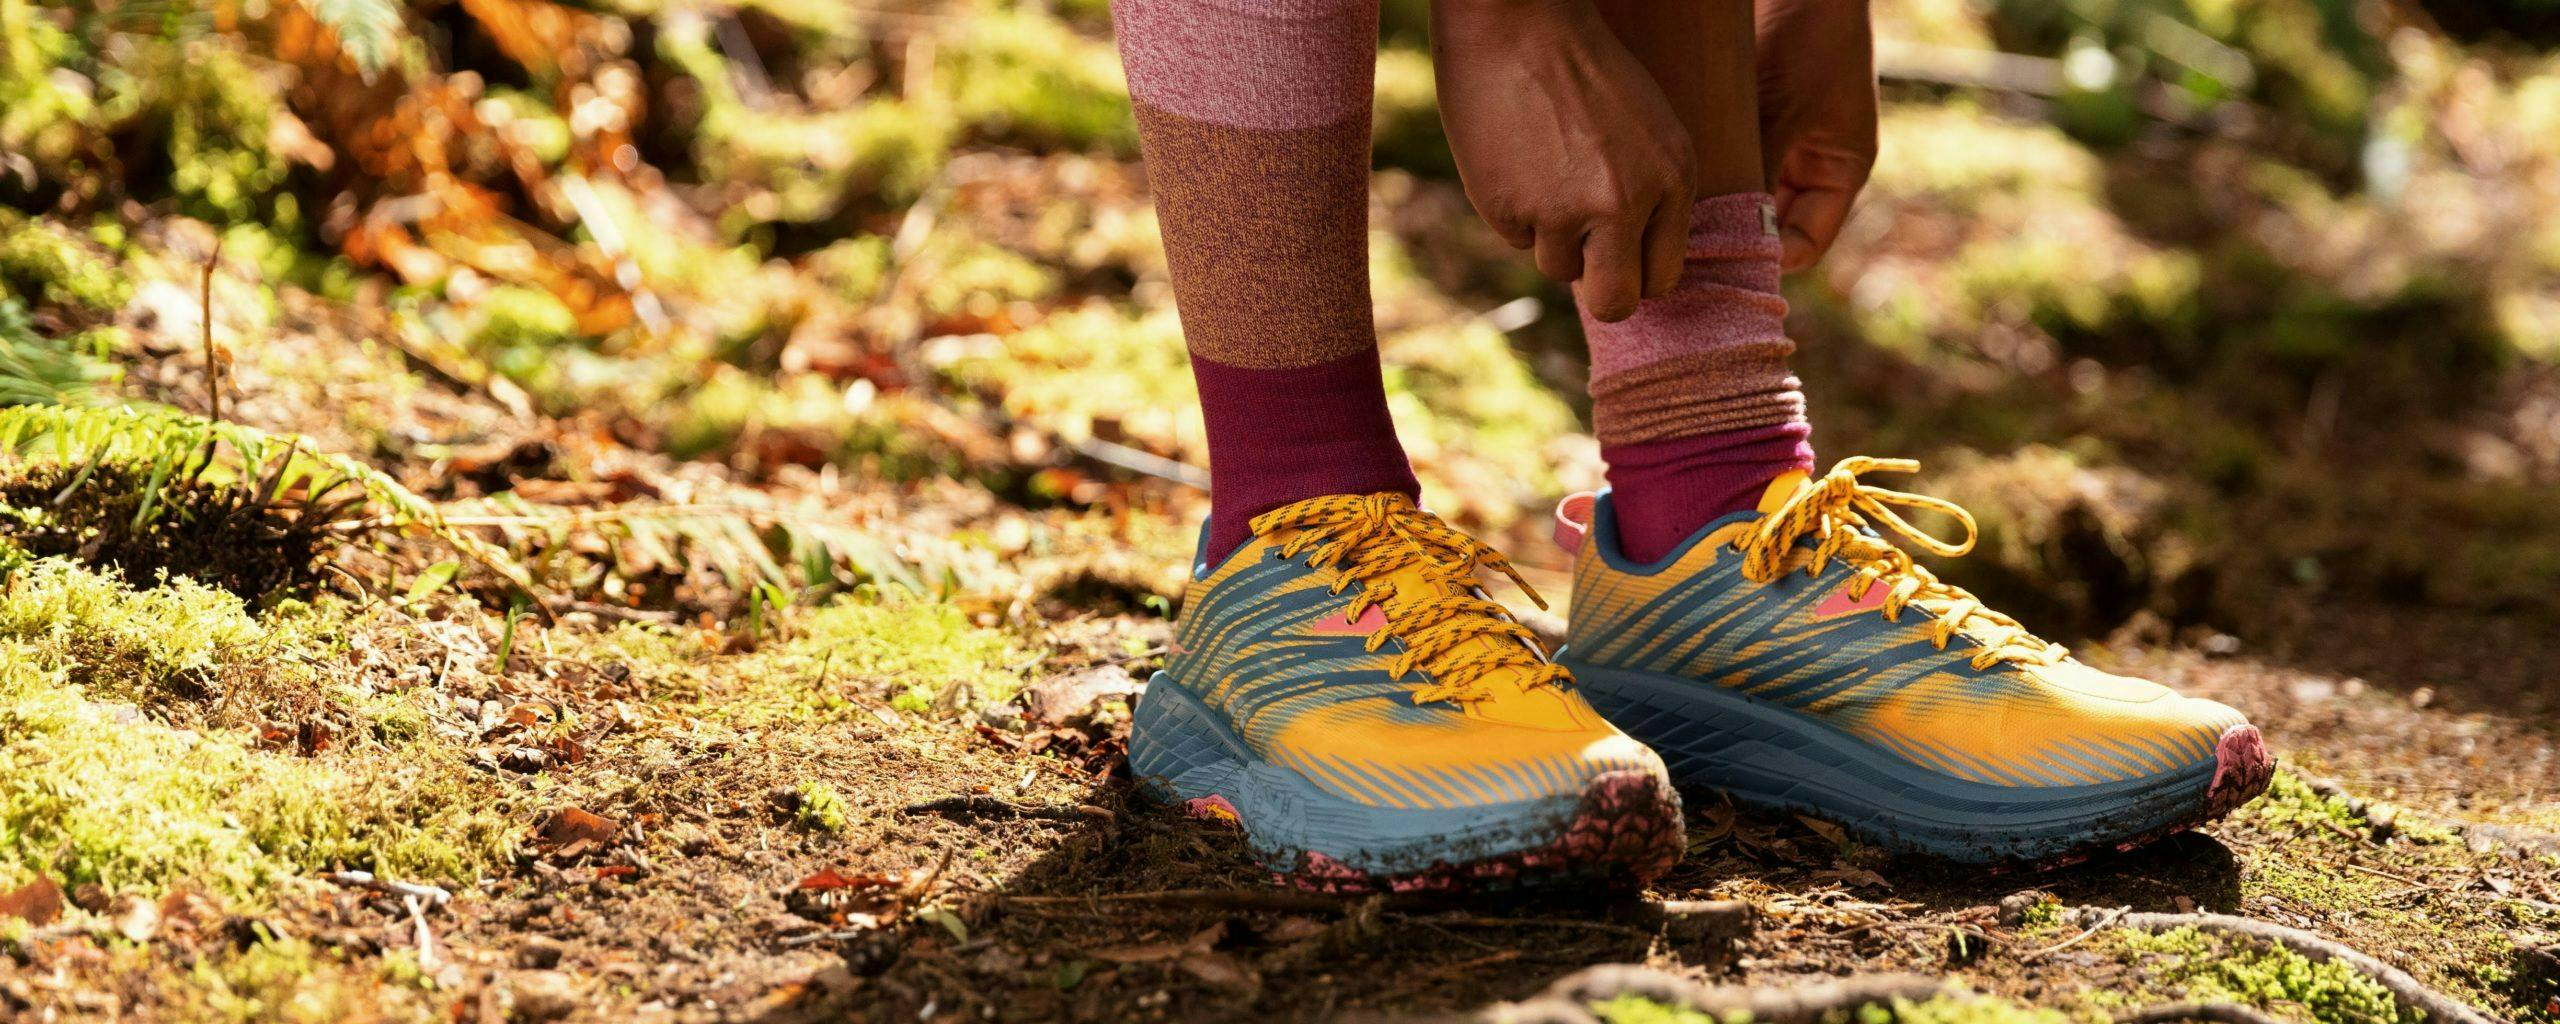 5 things you’ll learn about yourself at a trail race